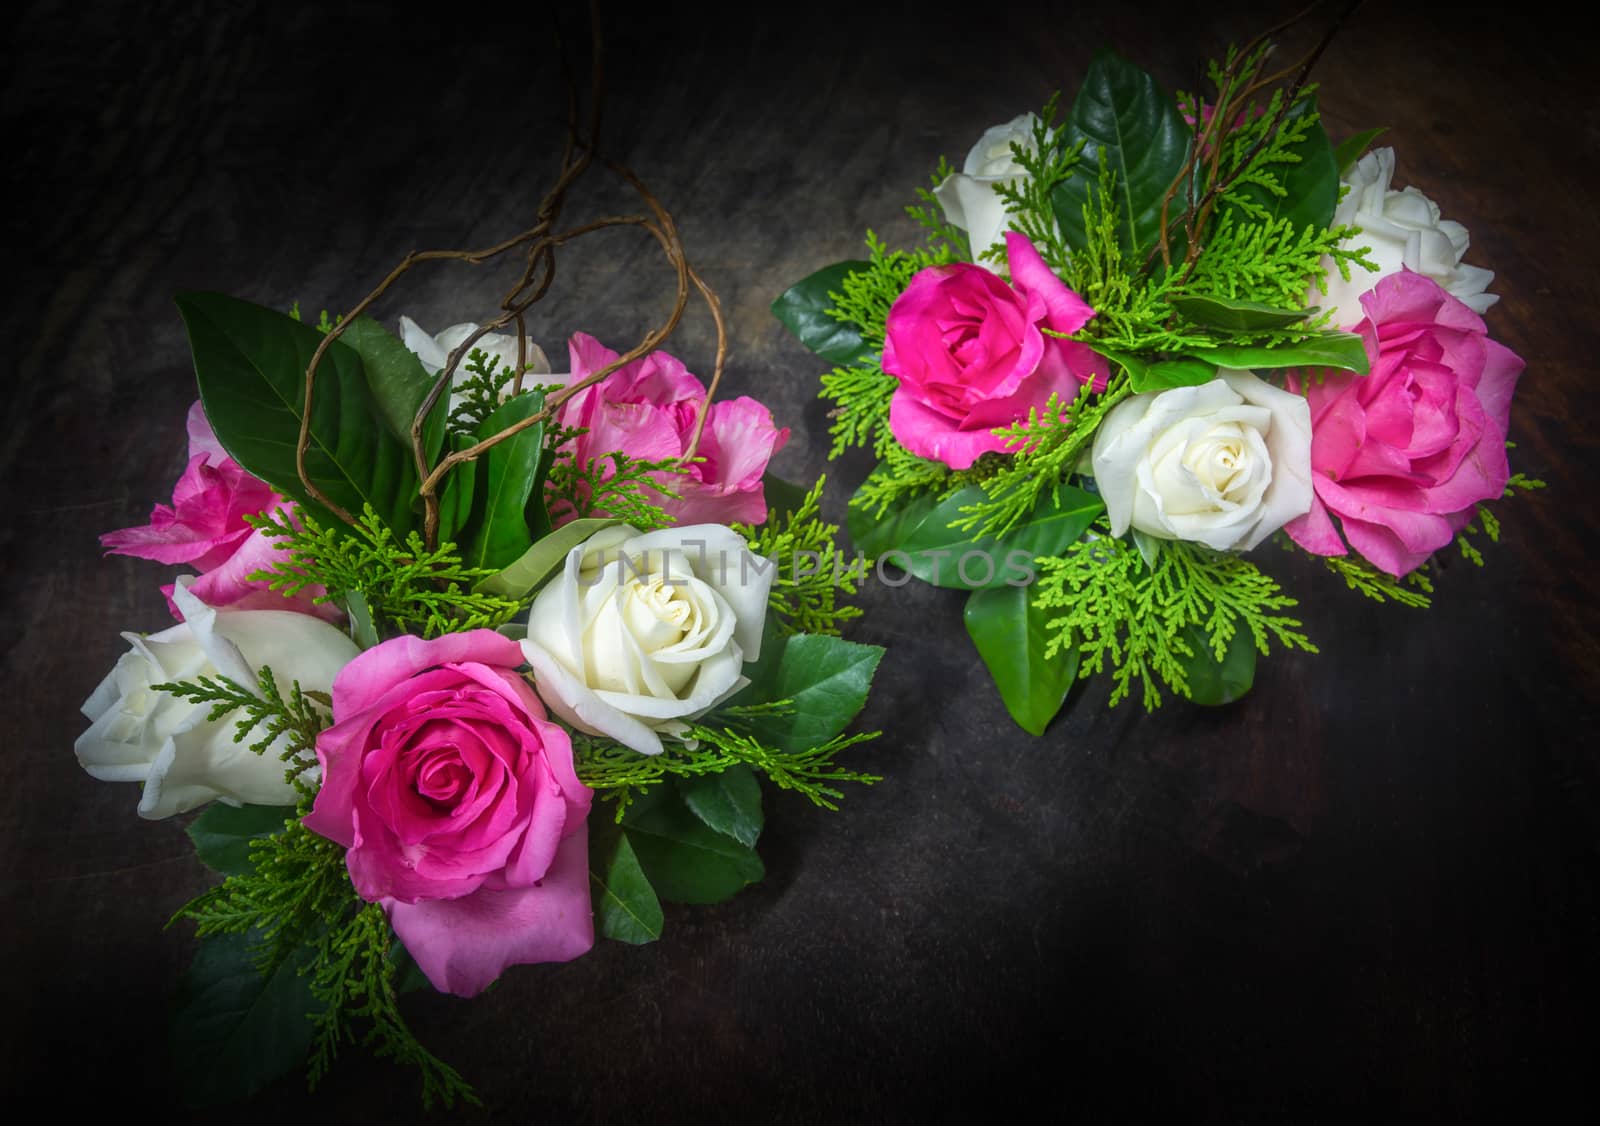 decorated pink and white roses with various leaves by matter77